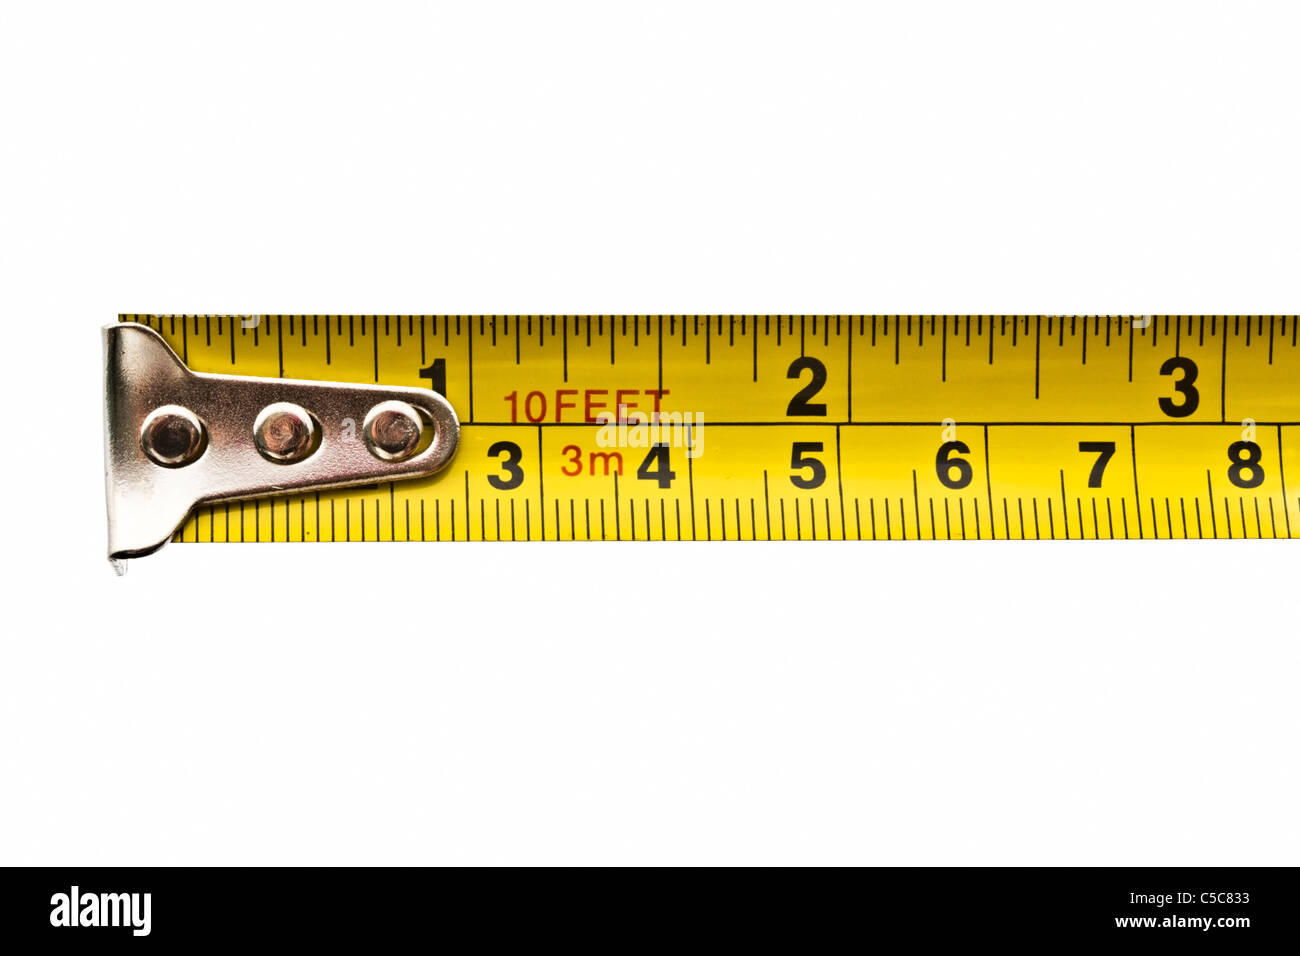 Young man with measuring tape showing his slim body on white background,  closeup Stock Photo by ©NewAfrica 272177214